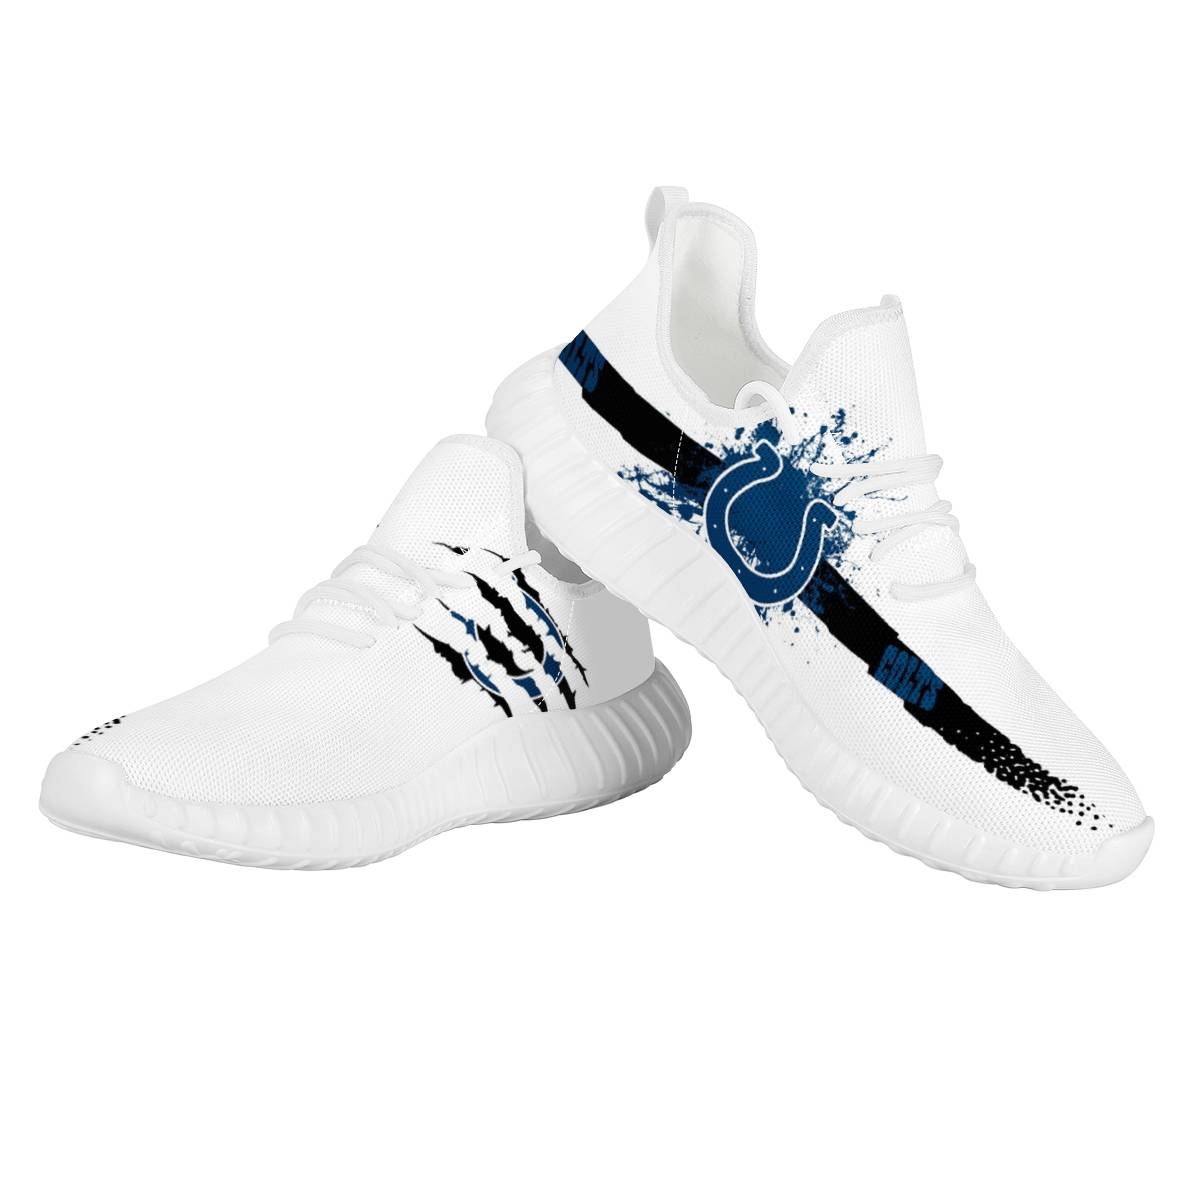 Men's Indianapolis Colts Mesh Knit Sneakers/Shoes 006